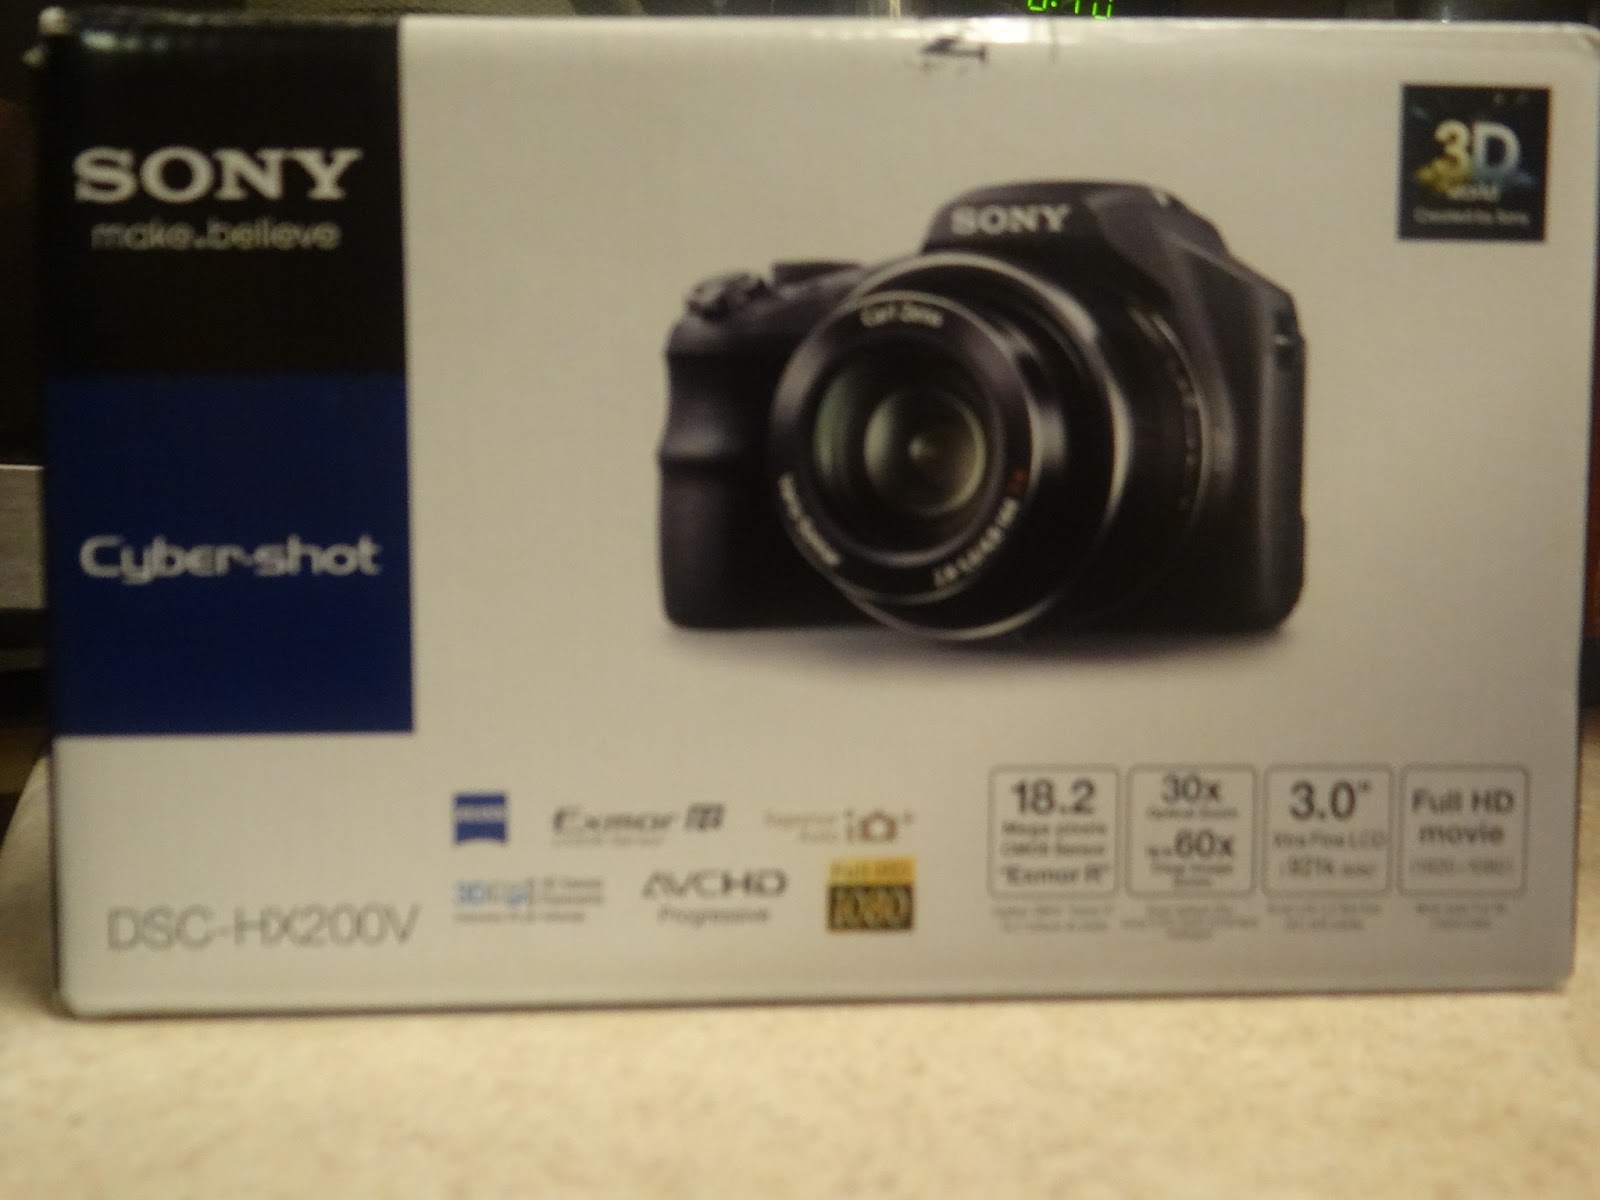 Media From the Heart by Ruth Hill | Sony Cyber-shot DSC-HX200V Giveaway